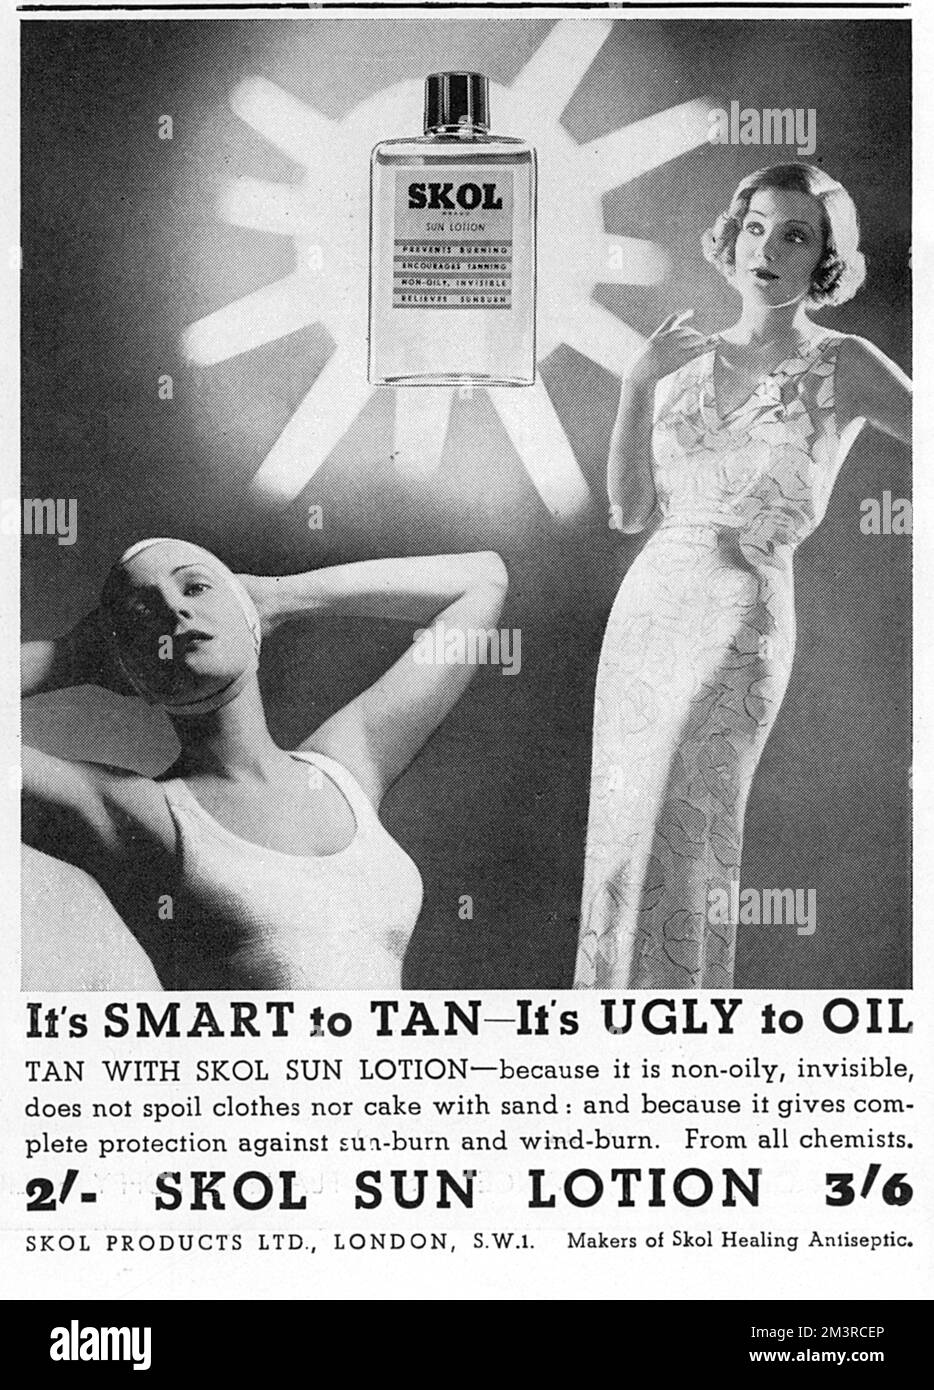 Skol sun lotion advertisement - non-oily, invisible, does not spoil clothes nor cake with sand.  Gives complete protection against sunburn and windburn.  1936 Stock Photo